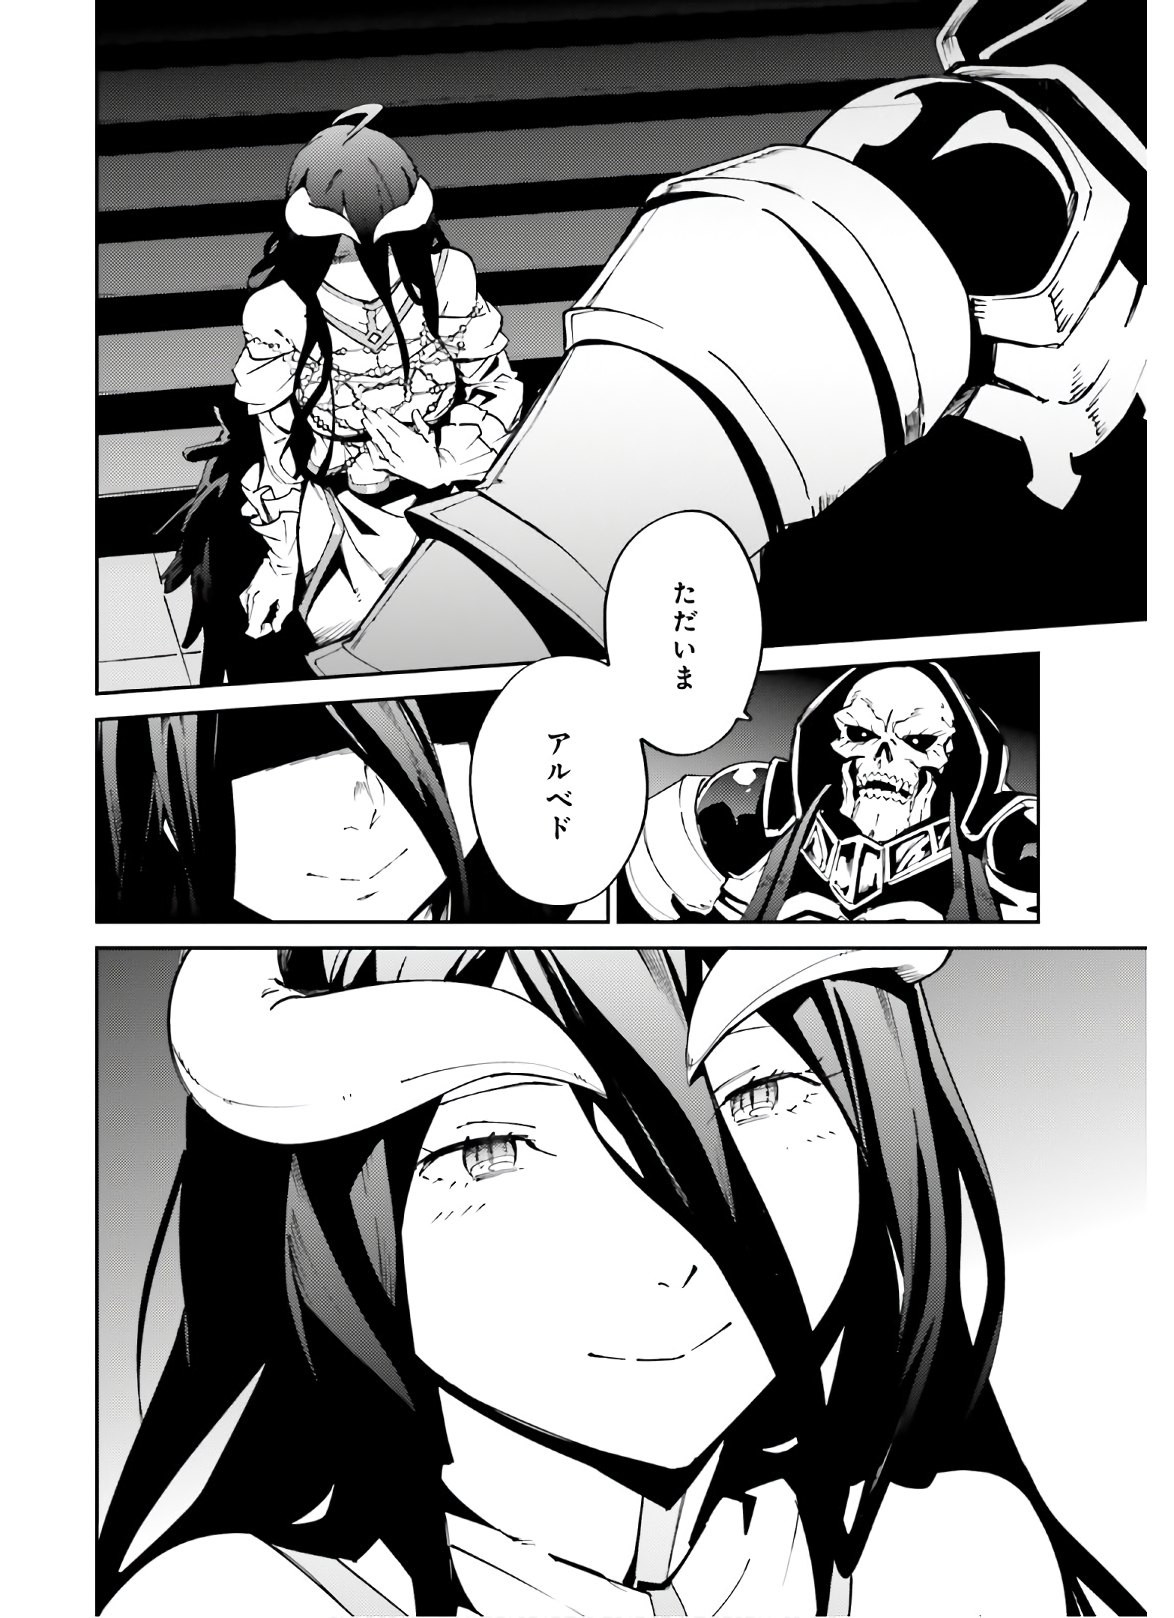 Overlord - Chapter 62 - Page 2